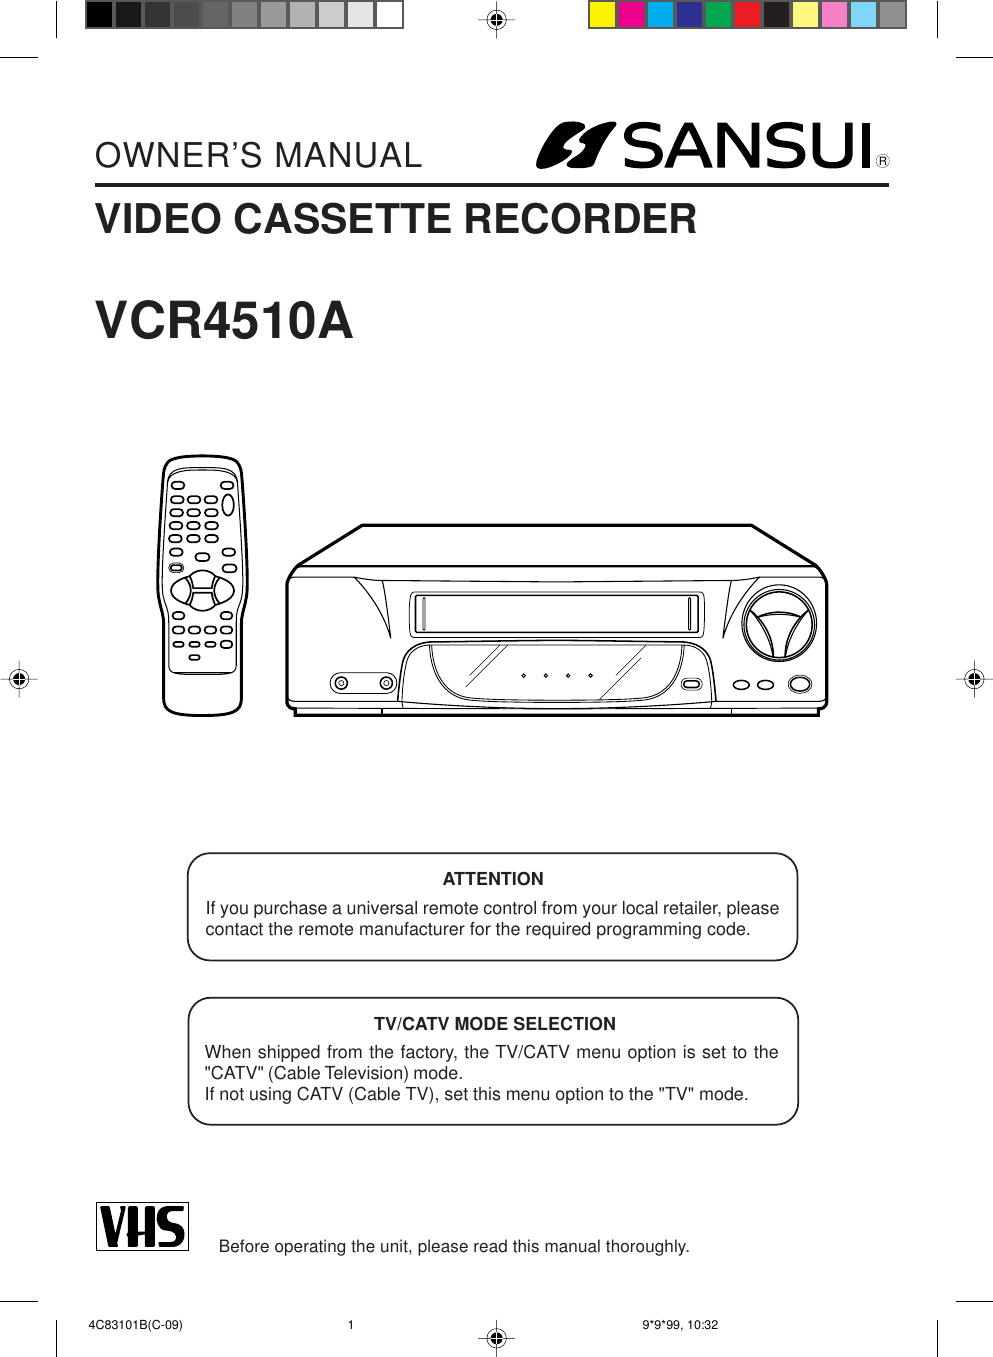 RVIDEO CASSETTE RECORDEROWNER’S MANUALBefore operating the unit, please read this manual thoroughly.VCR4510ATV/CATV MODE SELECTIONWhen shipped from the factory, the TV/CATV menu option is set to the&quot;CATV&quot; (Cable Television) mode.If not using CATV (Cable TV), set this menu option to the &quot;TV&quot; mode.ATTENTIONIf you purchase a universal remote control from your local retailer, pleasecontact the remote manufacturer for the required programming code. 4C83101B(C-09) 9*9*99, 10:321